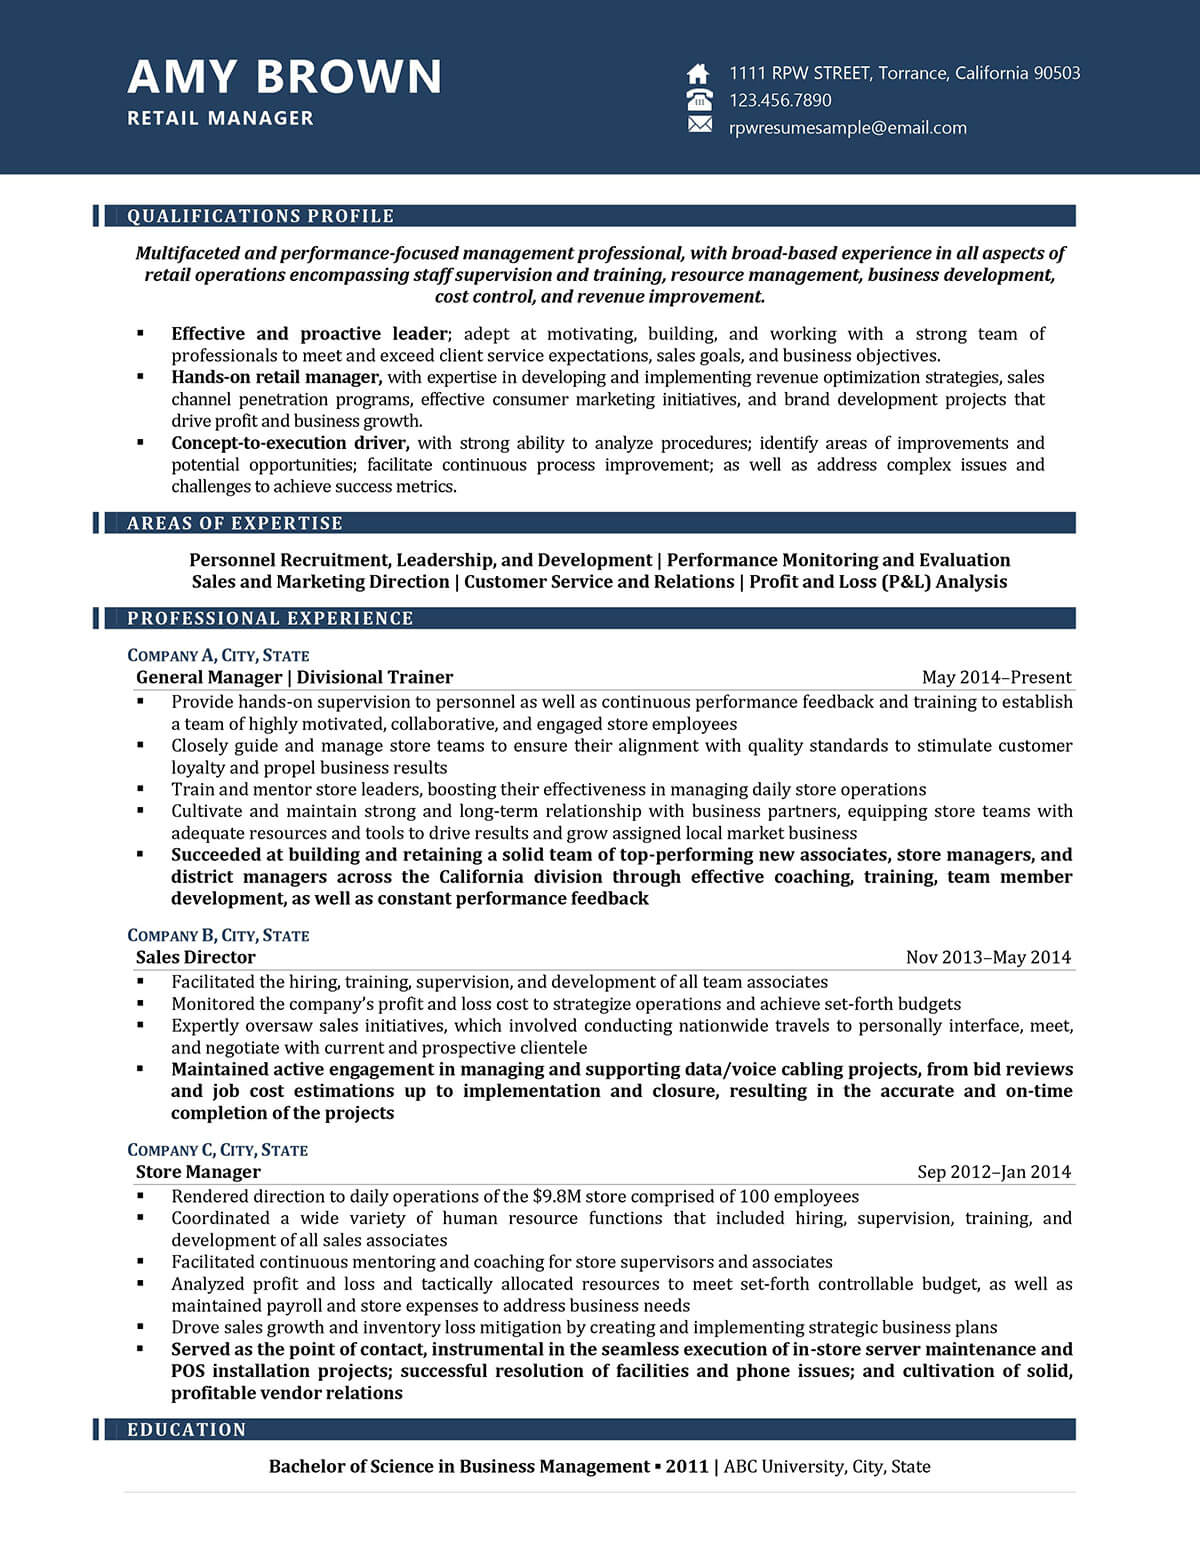 Resume Professional Writers Retail Manager Resume Example